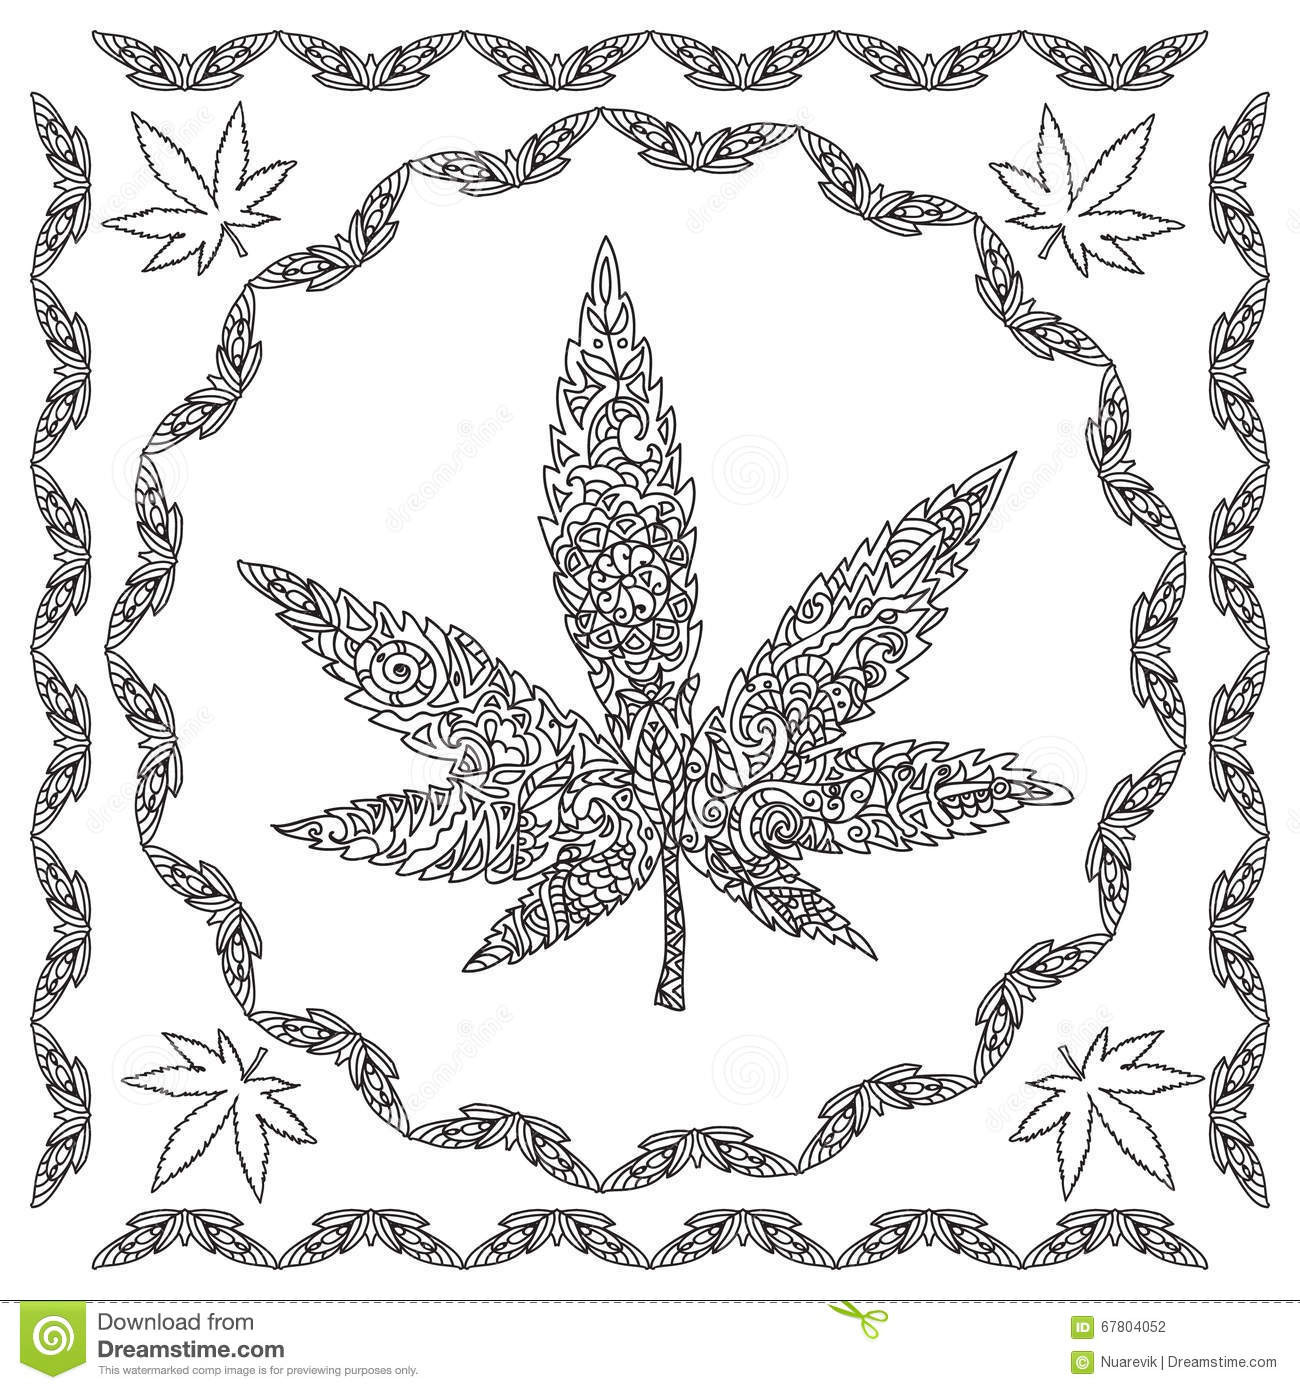 Marijuana Coloring Pages For Adults
 Cannabis coloring Download Cannabis coloring